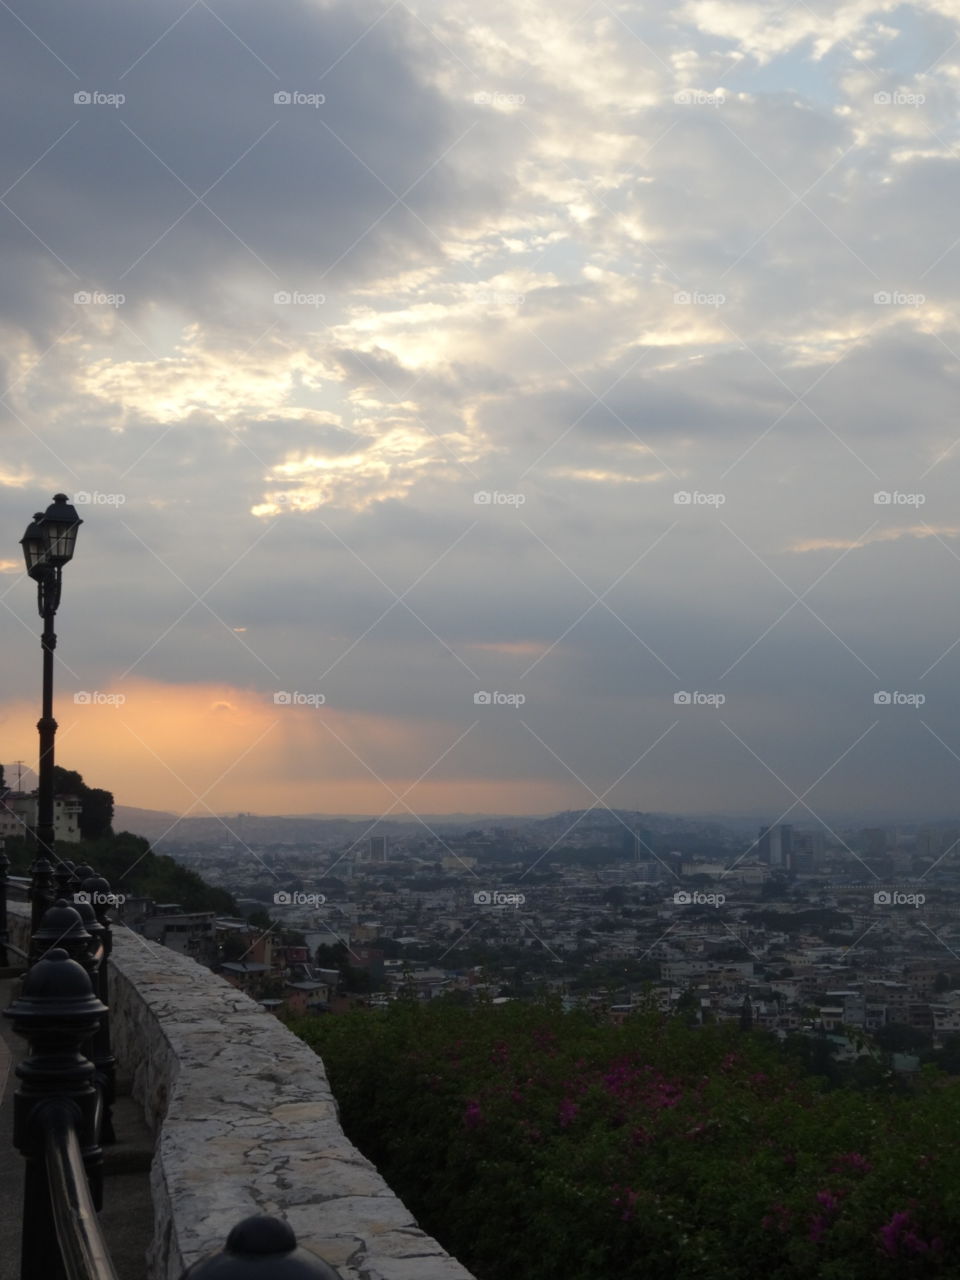 A cityscape of Guayaquil, Ecuador under a gorgeous sunset.